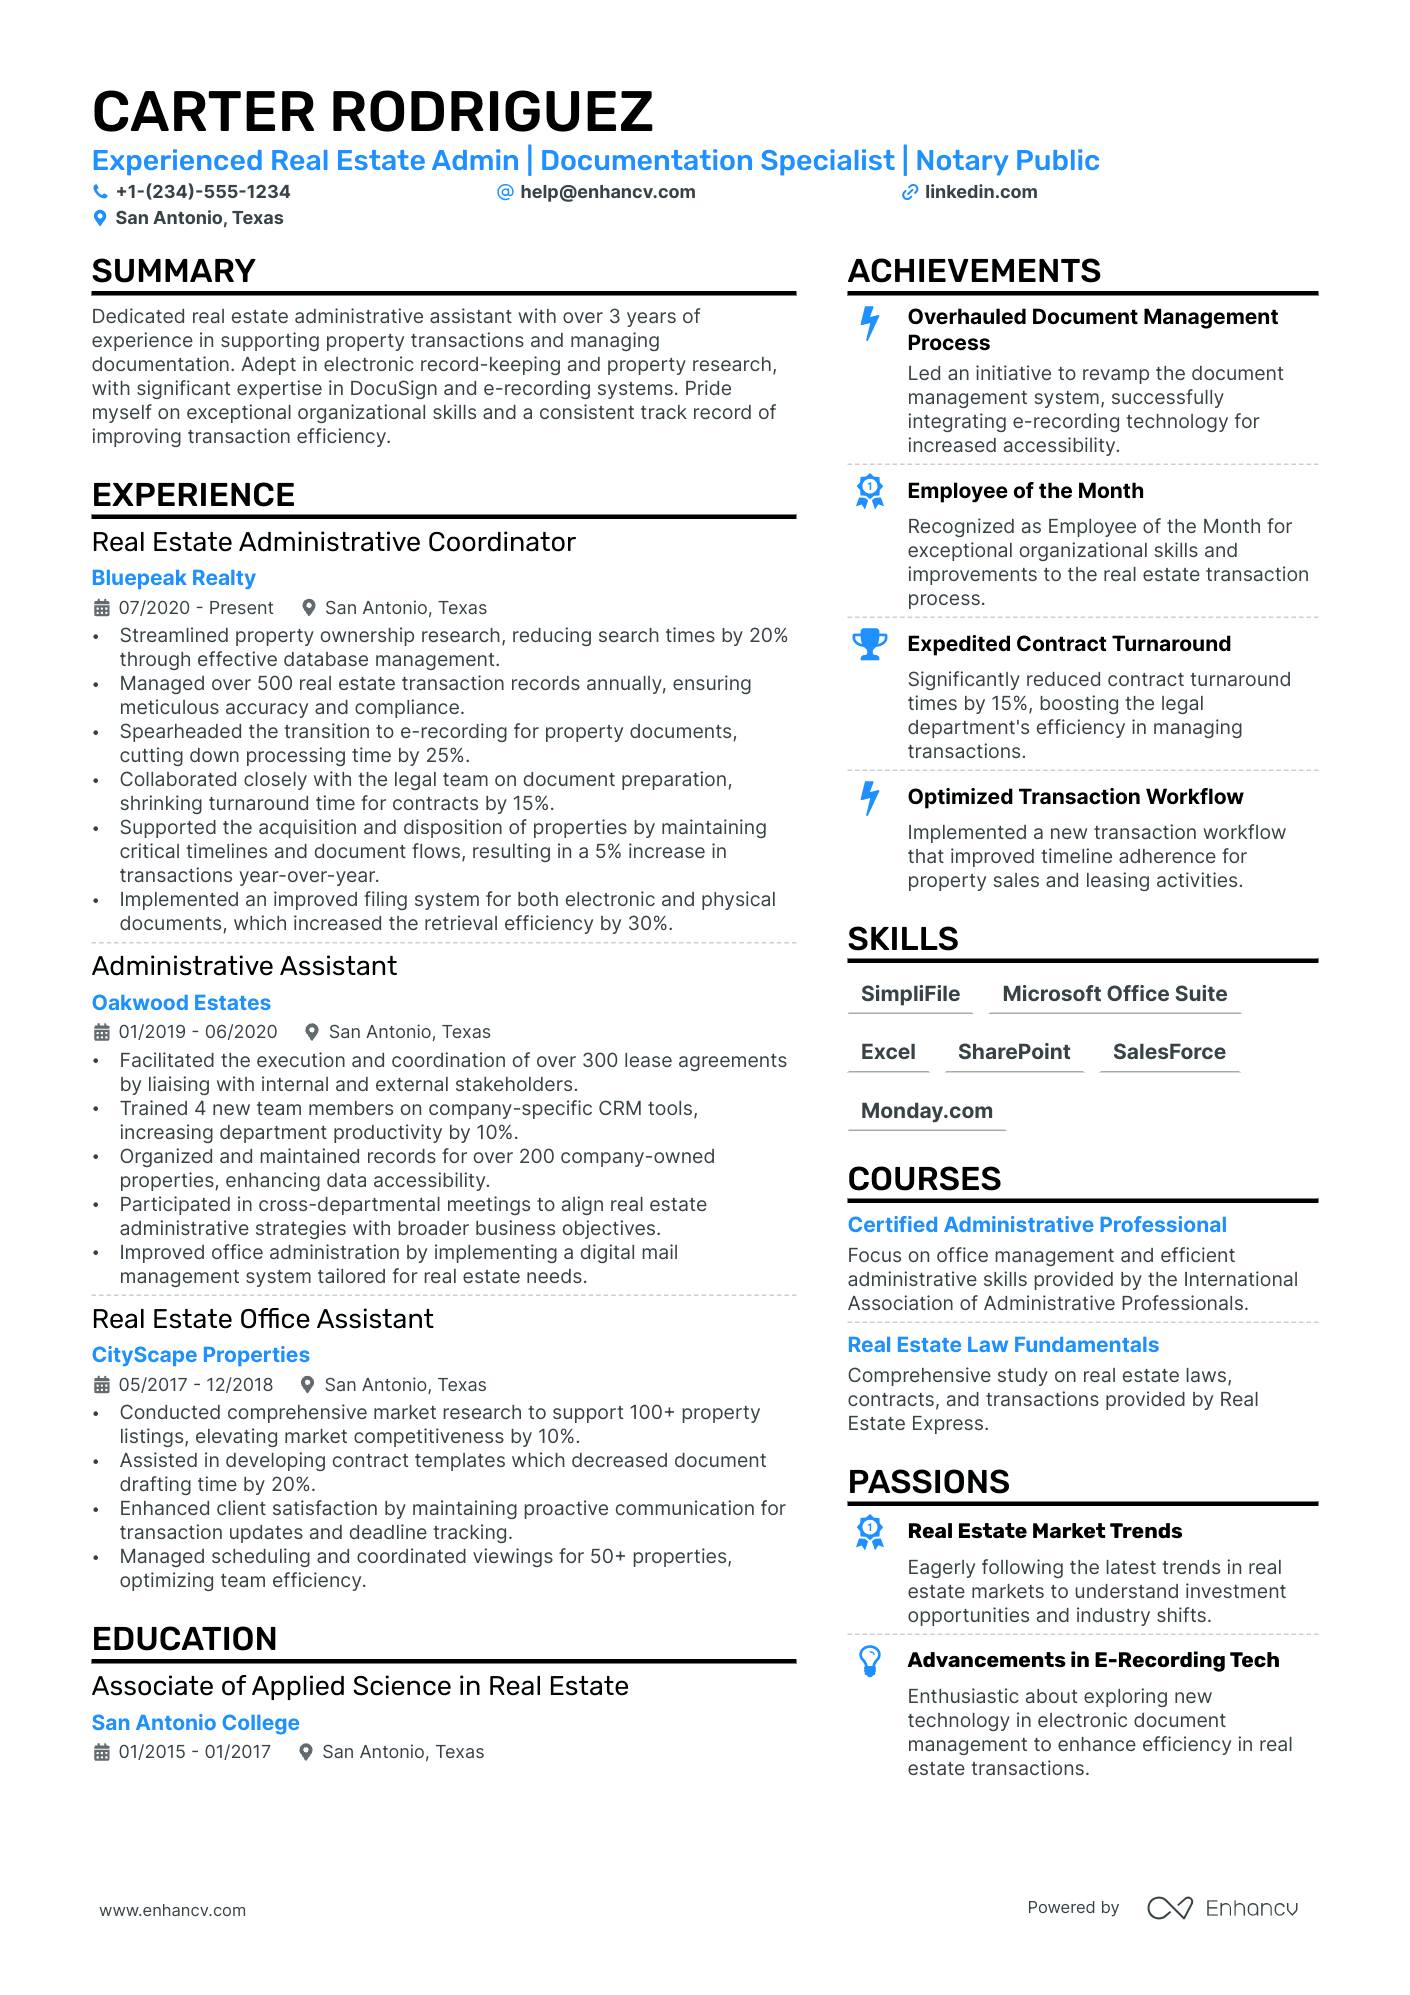 Real Estate Administrative Assistant resume example